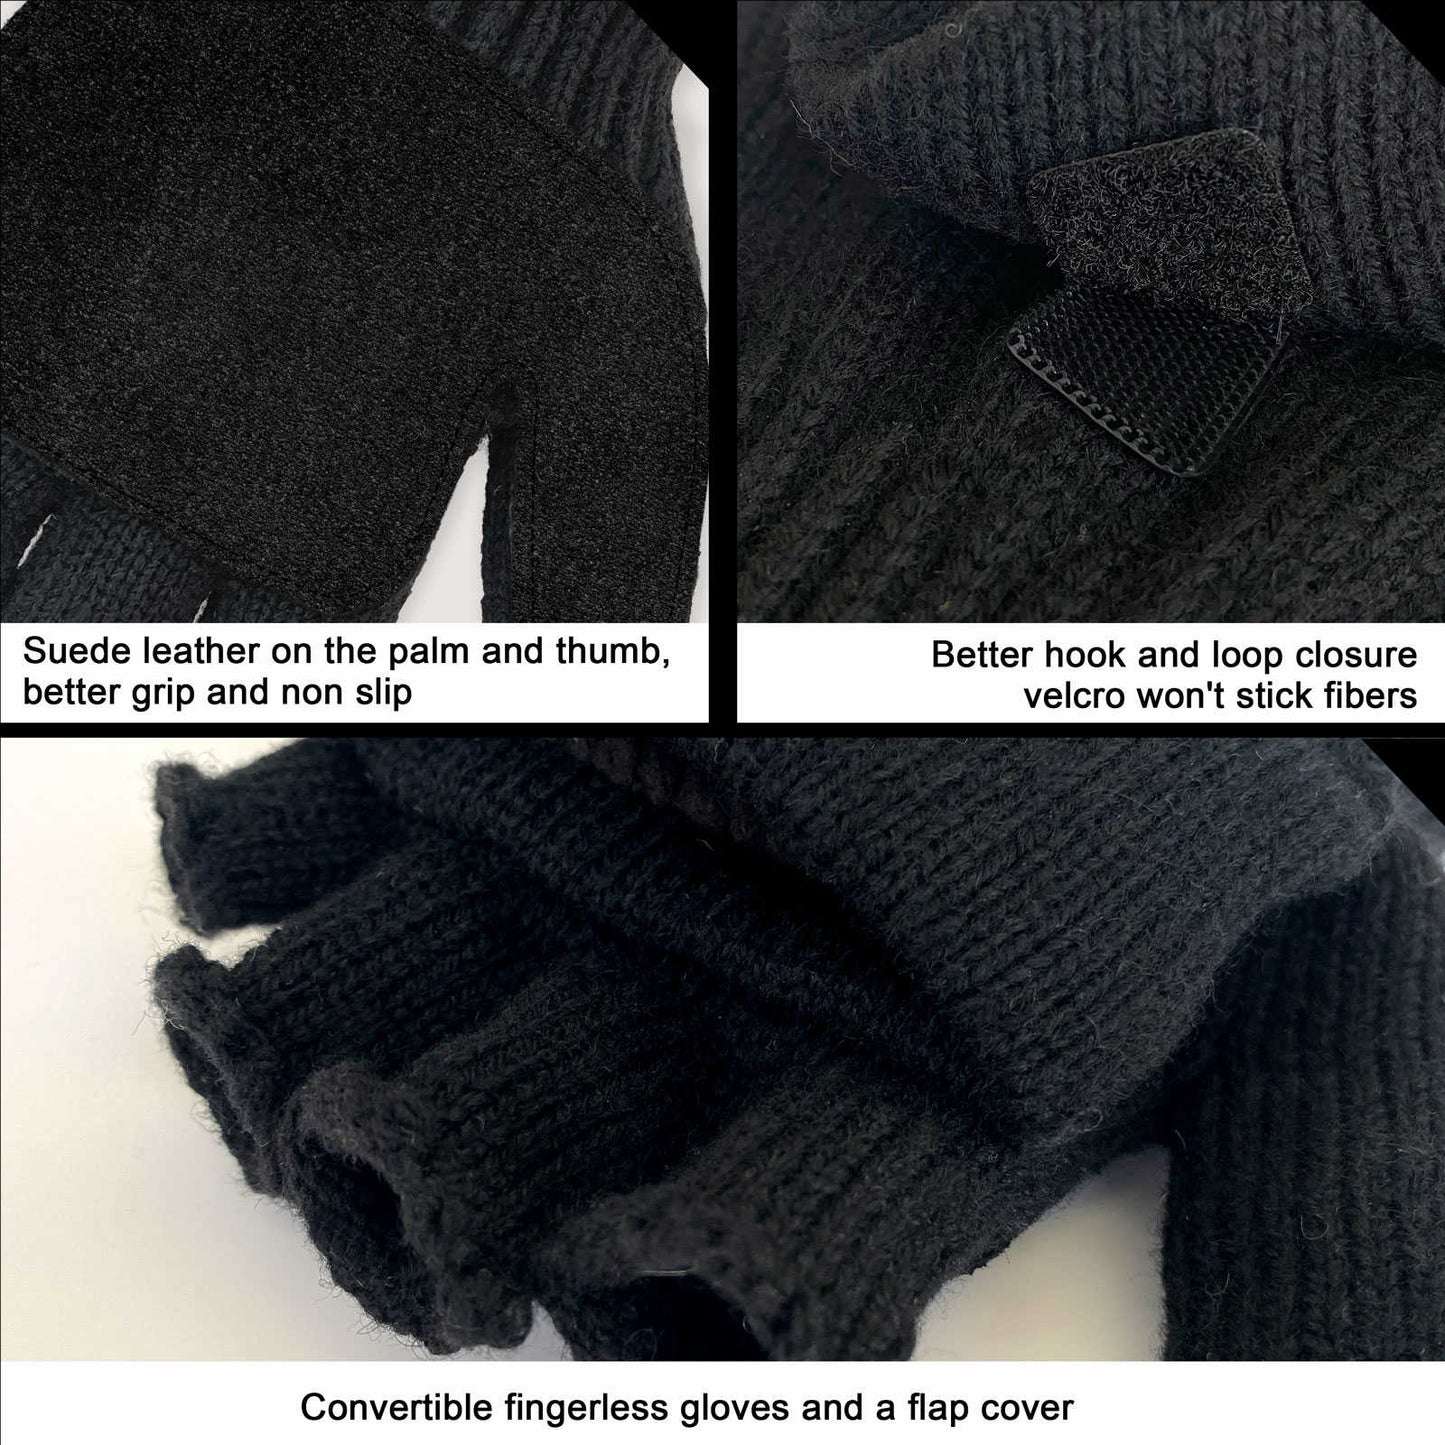 EvridWear Winter Convertible Fingerless Gloves, Evridwear Wool Mittens Warm, with Anti-Slip Suede Leather Palm and Thumb, Unisex Style